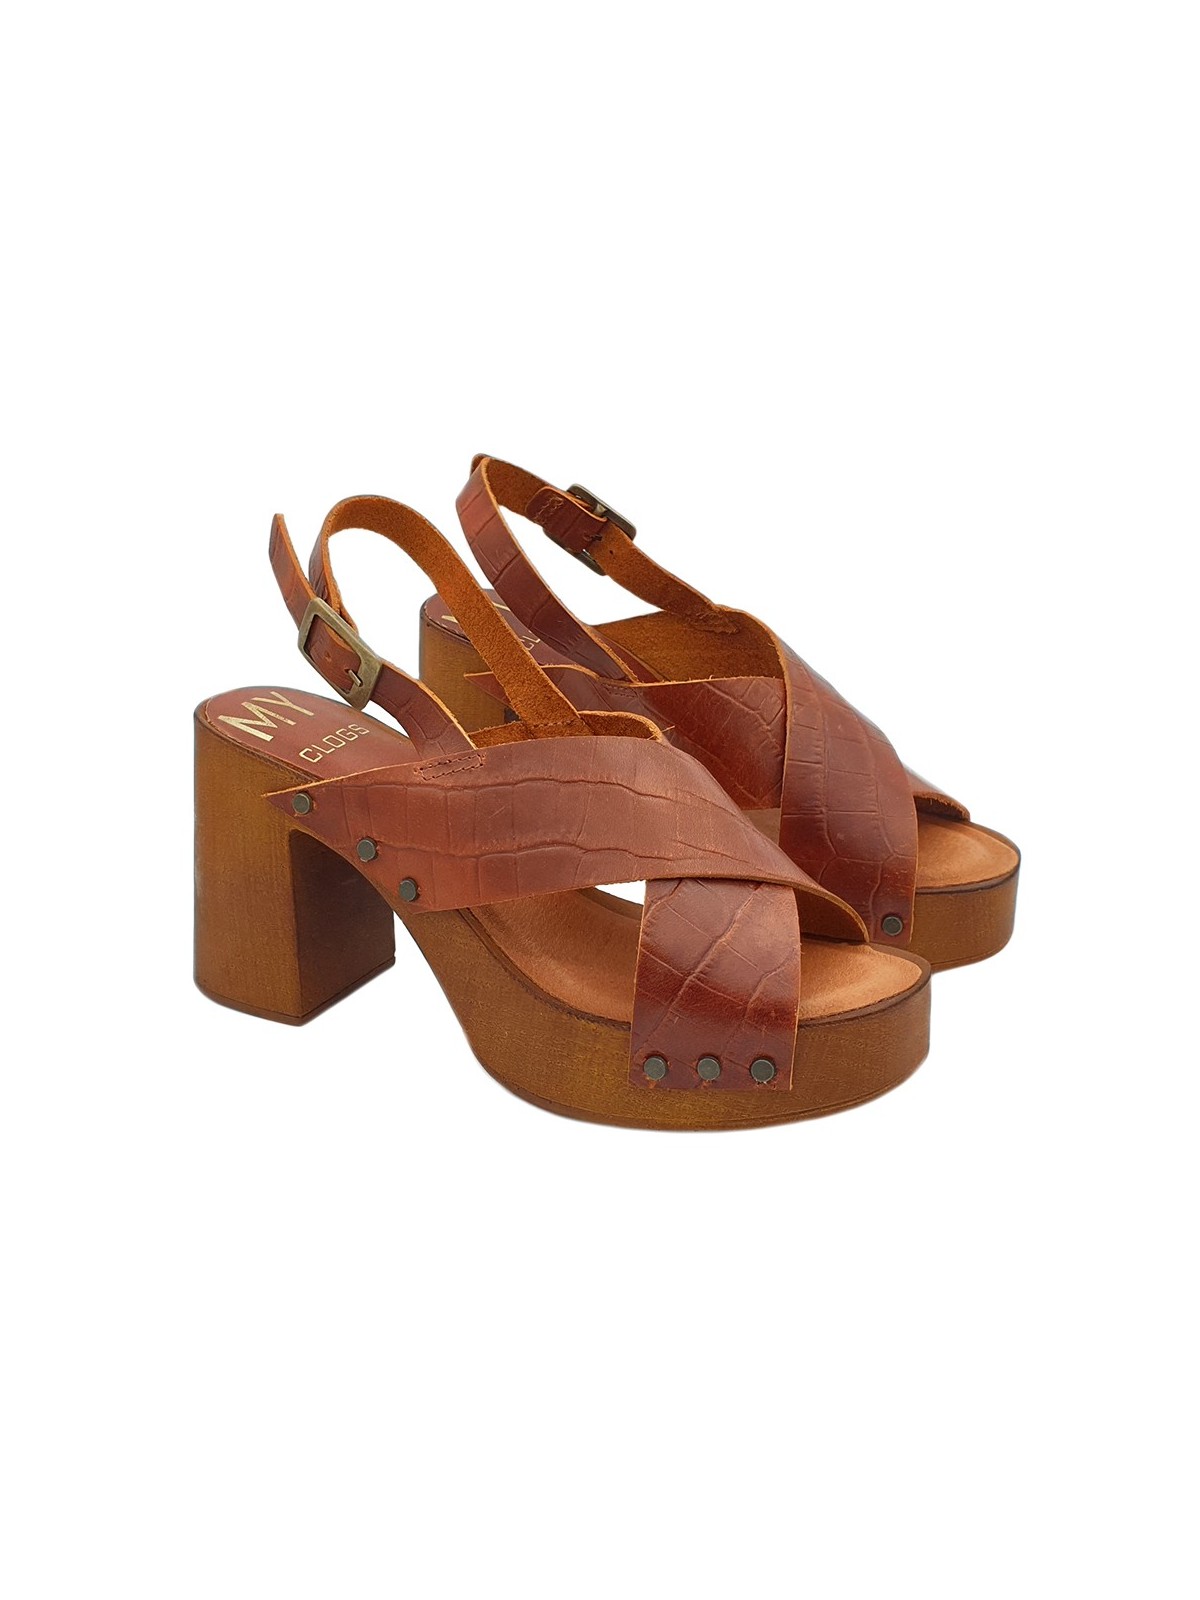 CLOGS BROWN CROCODILE WITH ANKLE STRAP